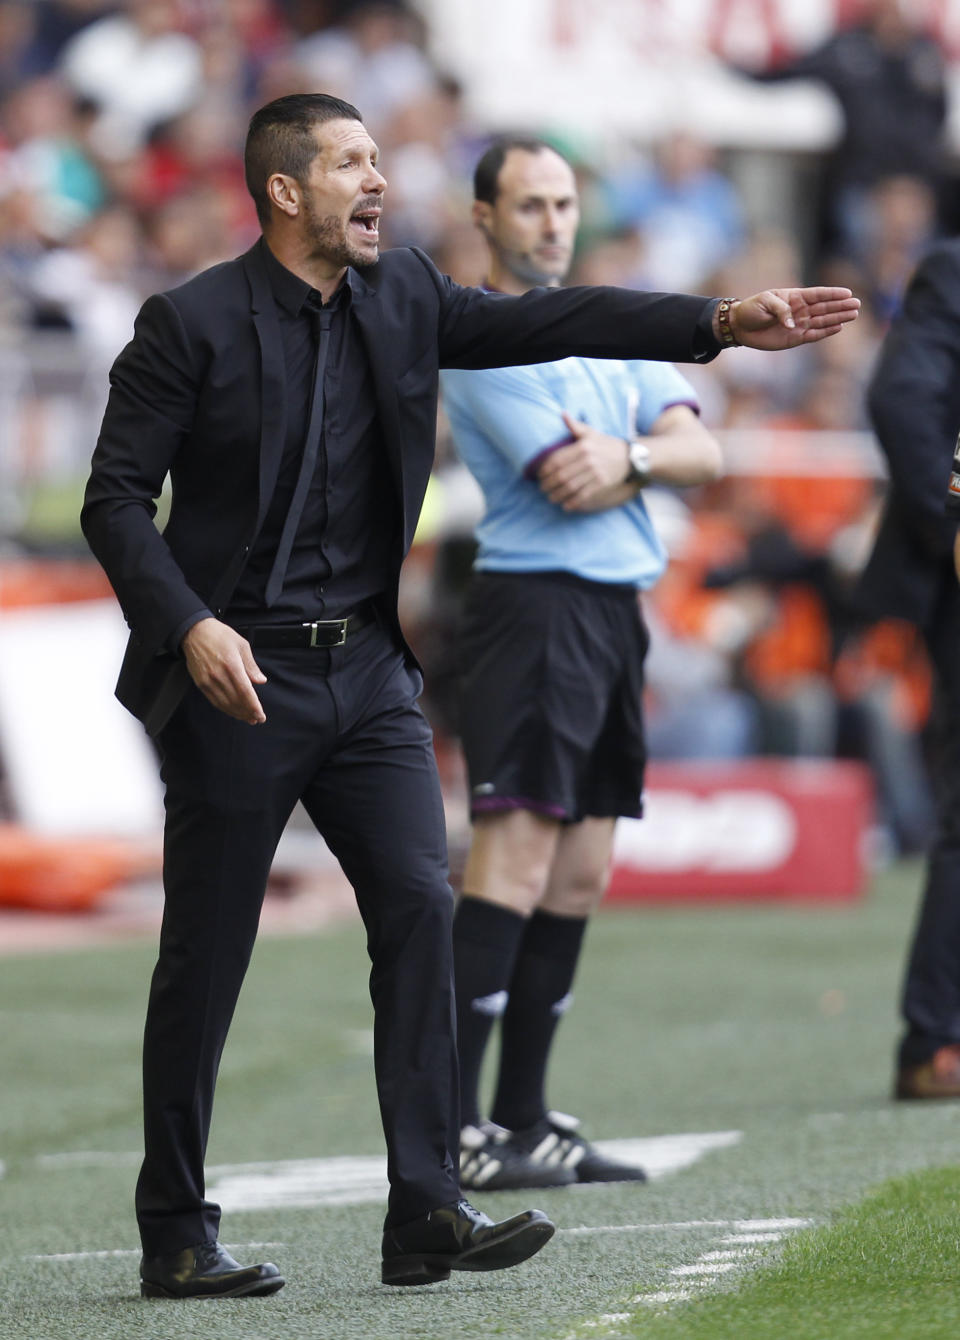 Atletico's de Madrid coach Diego Simeone from Argentina gesture to their players during a Spanish La Liga soccer match against Valencia at the Mestalla stadium in Valencia, Spain, on Sunday, April 27, 2014. (AP Photo/Alberto Saiz)